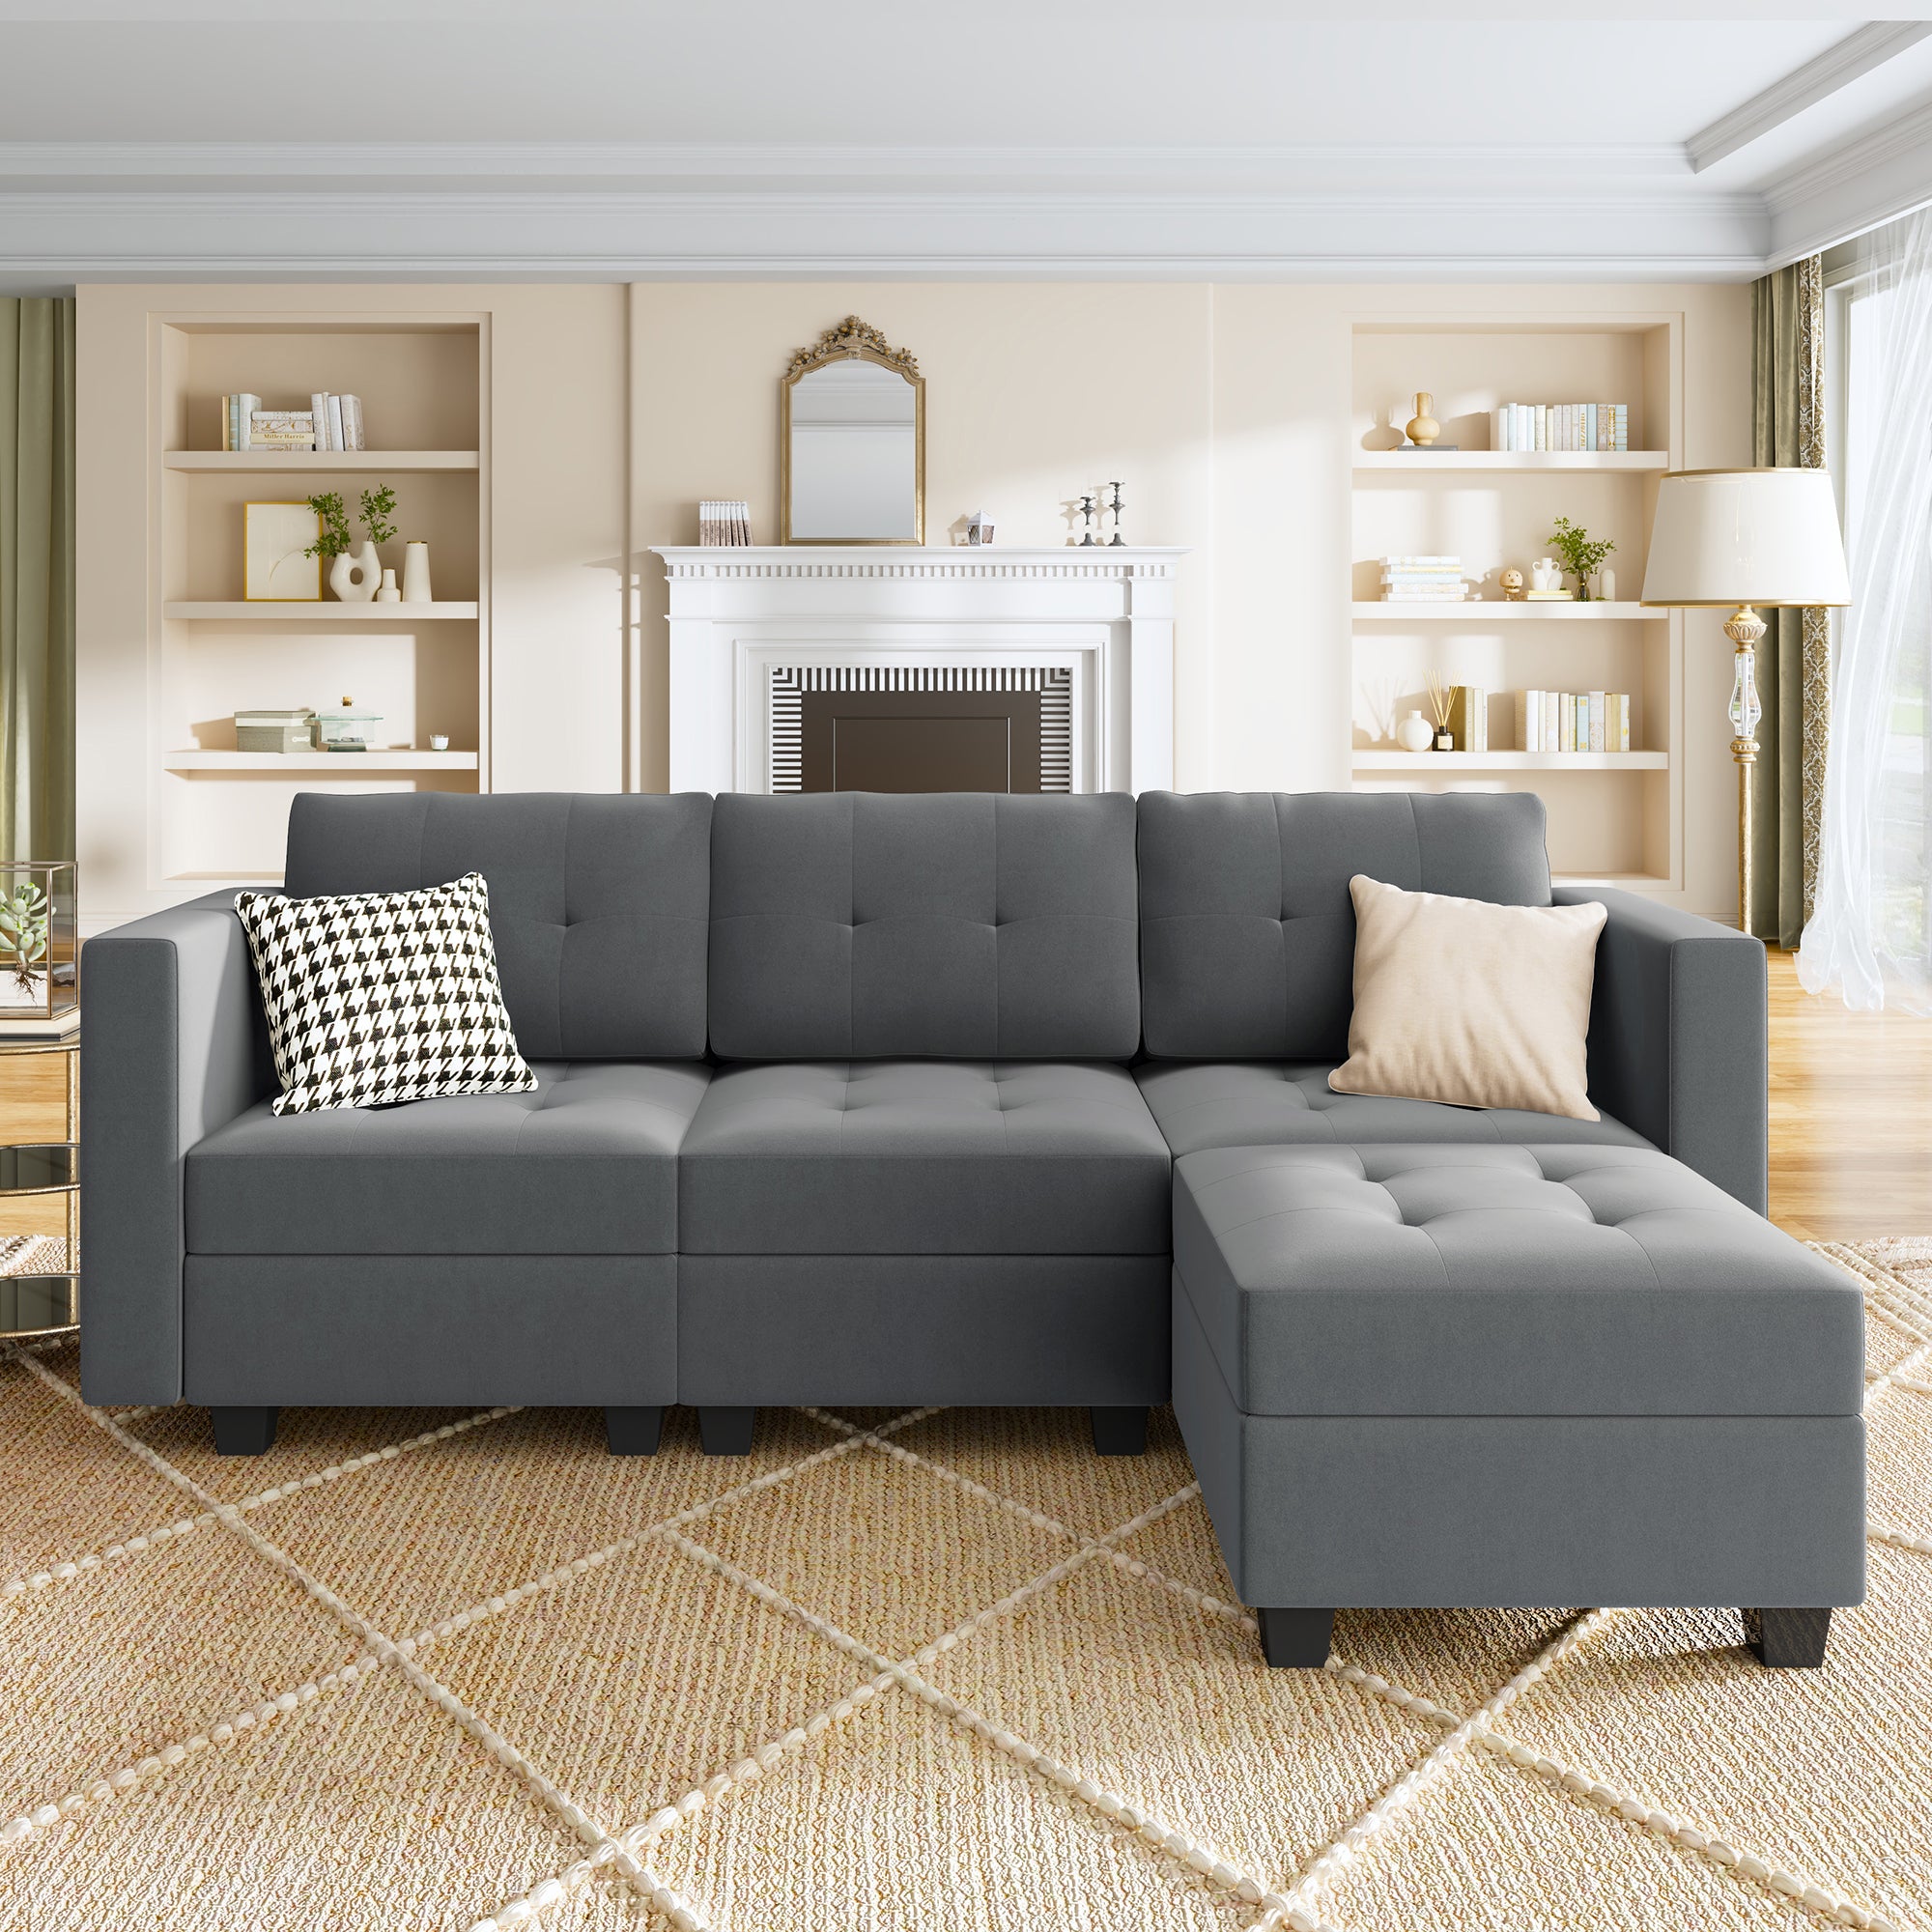 HONBAY Tufted Modular Sofa 3-Seat+1-Side Armrest+1-Ottoman with Storage Seater